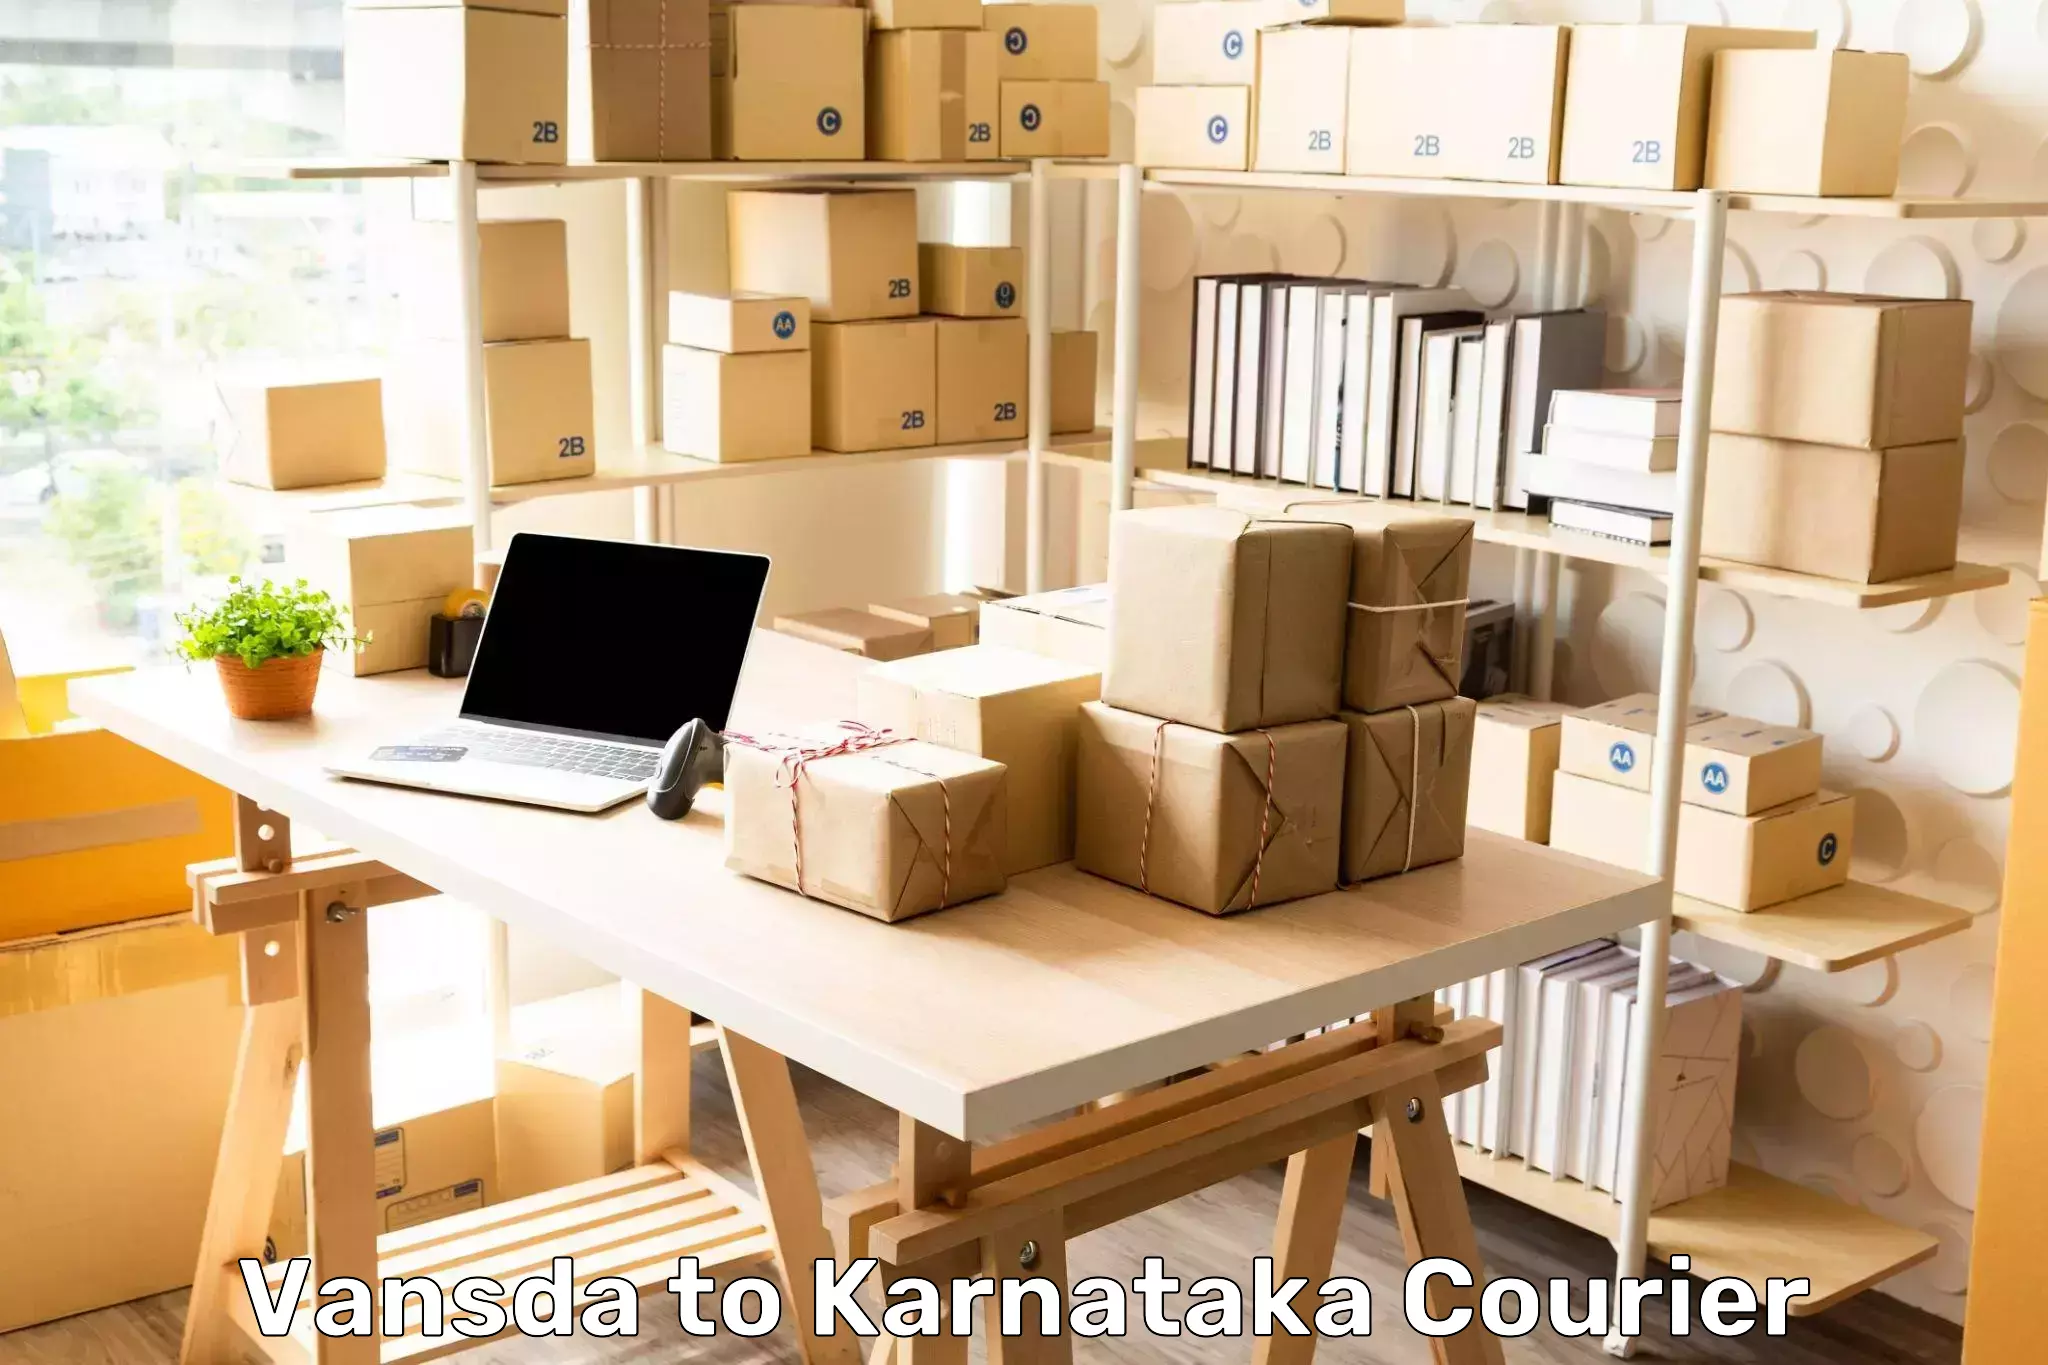 Cost-effective courier options Vansda to Mangalore